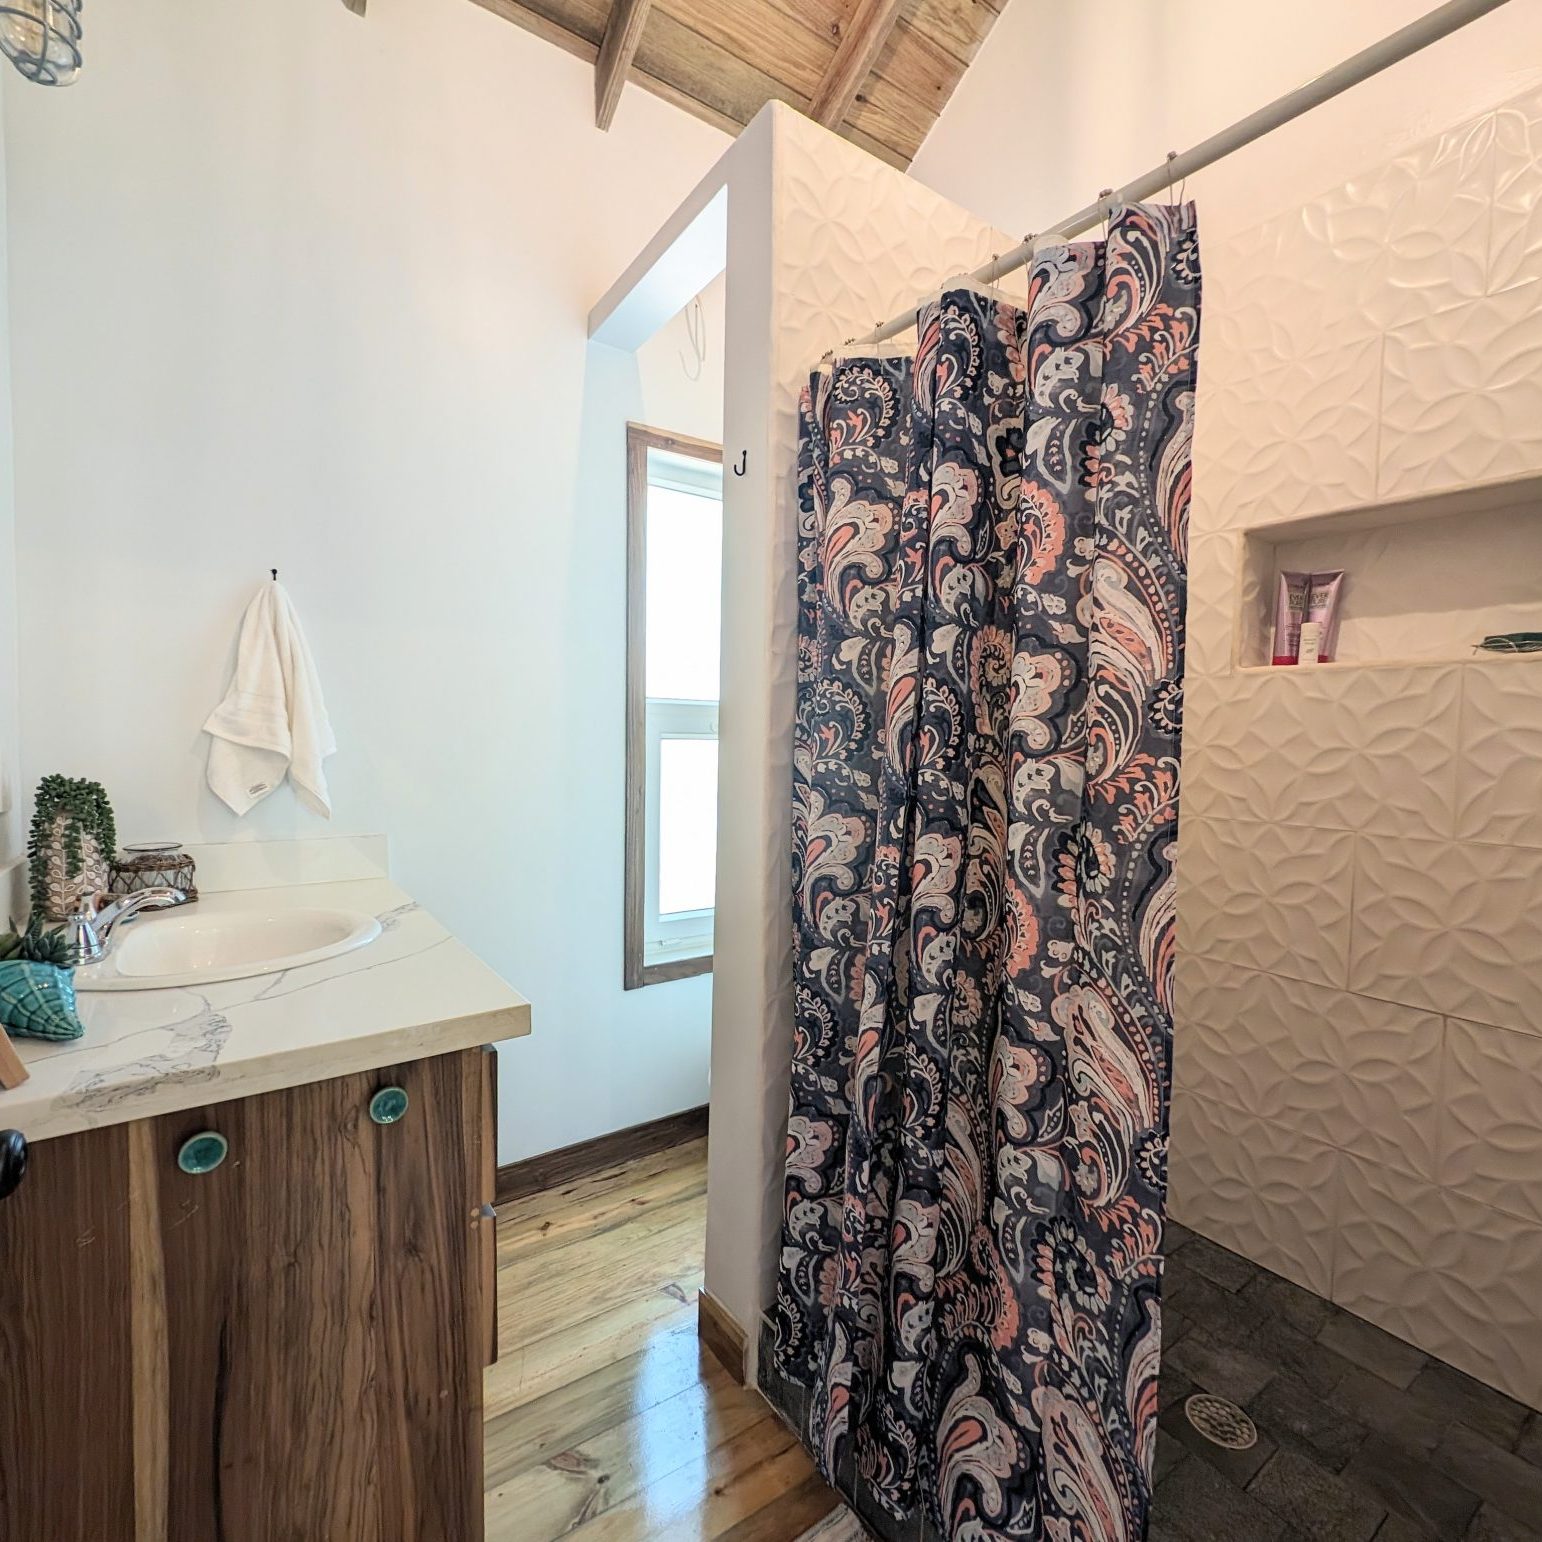 2BR Caribbean cabin with spacious tiled shower, large vanity, and toilet hidden from entrance